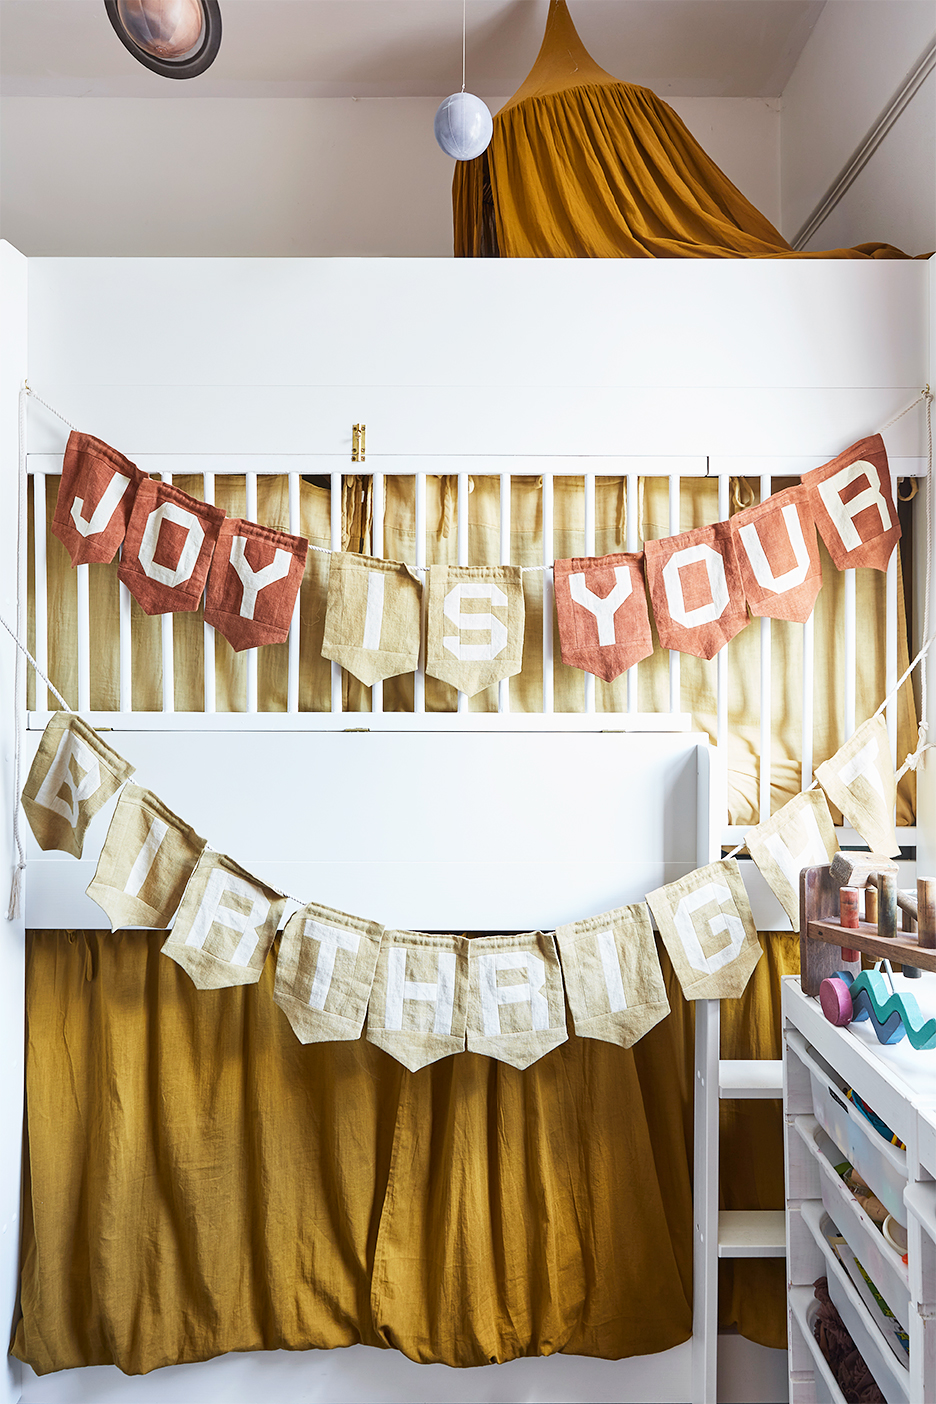 Banner reading "Joy Is Your Birthright" strung across kids' bunkbed.